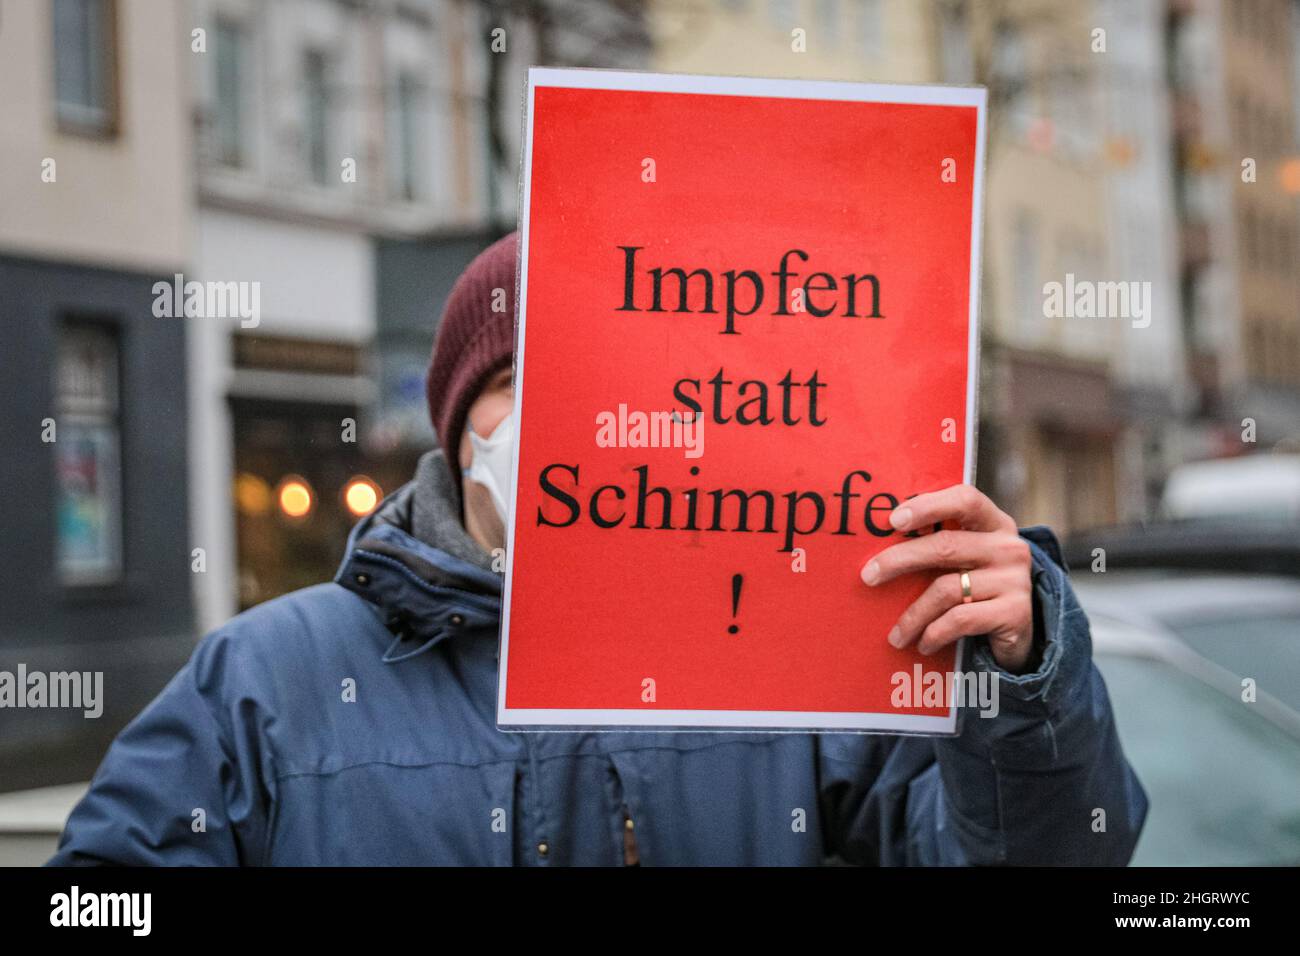 Dussedorf, NRW, Germany. 22nd Jan, 2022. Impfen statt Schimpfen' (vaccinate, don't moan) placard. A protest against compulsory vaccination, and related subjects marches through Dusseldorf city centre today, the capital of North Rhine-Westphalia. The march is met by groups of pro-vaccination, pro covid measures groups from activist and political groups as well as some pro-immigration and antifa protesters. Credit: Imageplotter/Alamy Live News Stock Photo